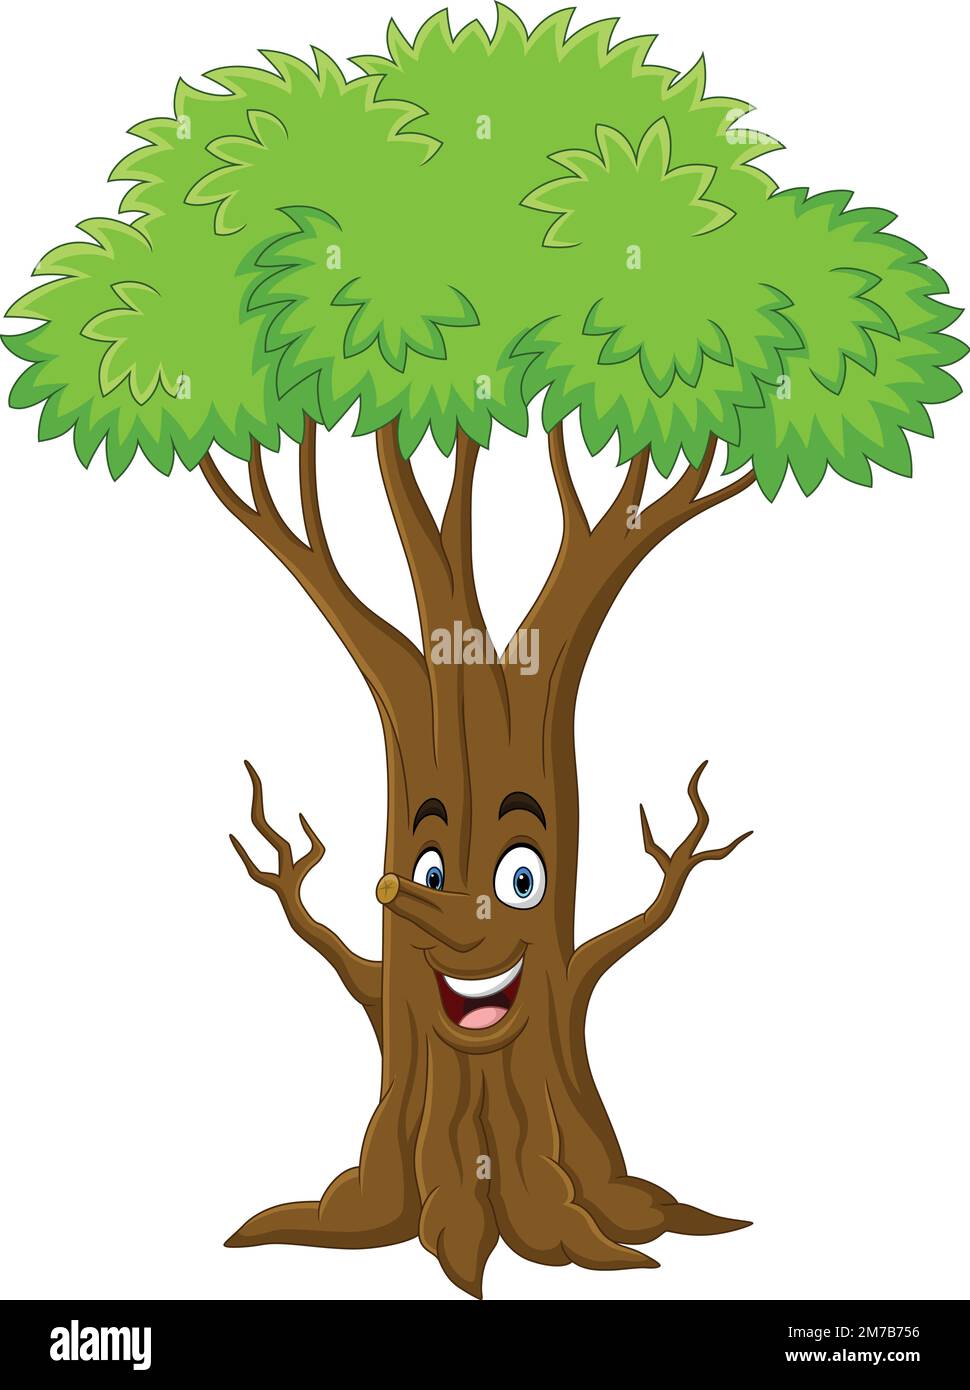 Cartoon funny tree character on white background Stock Vector